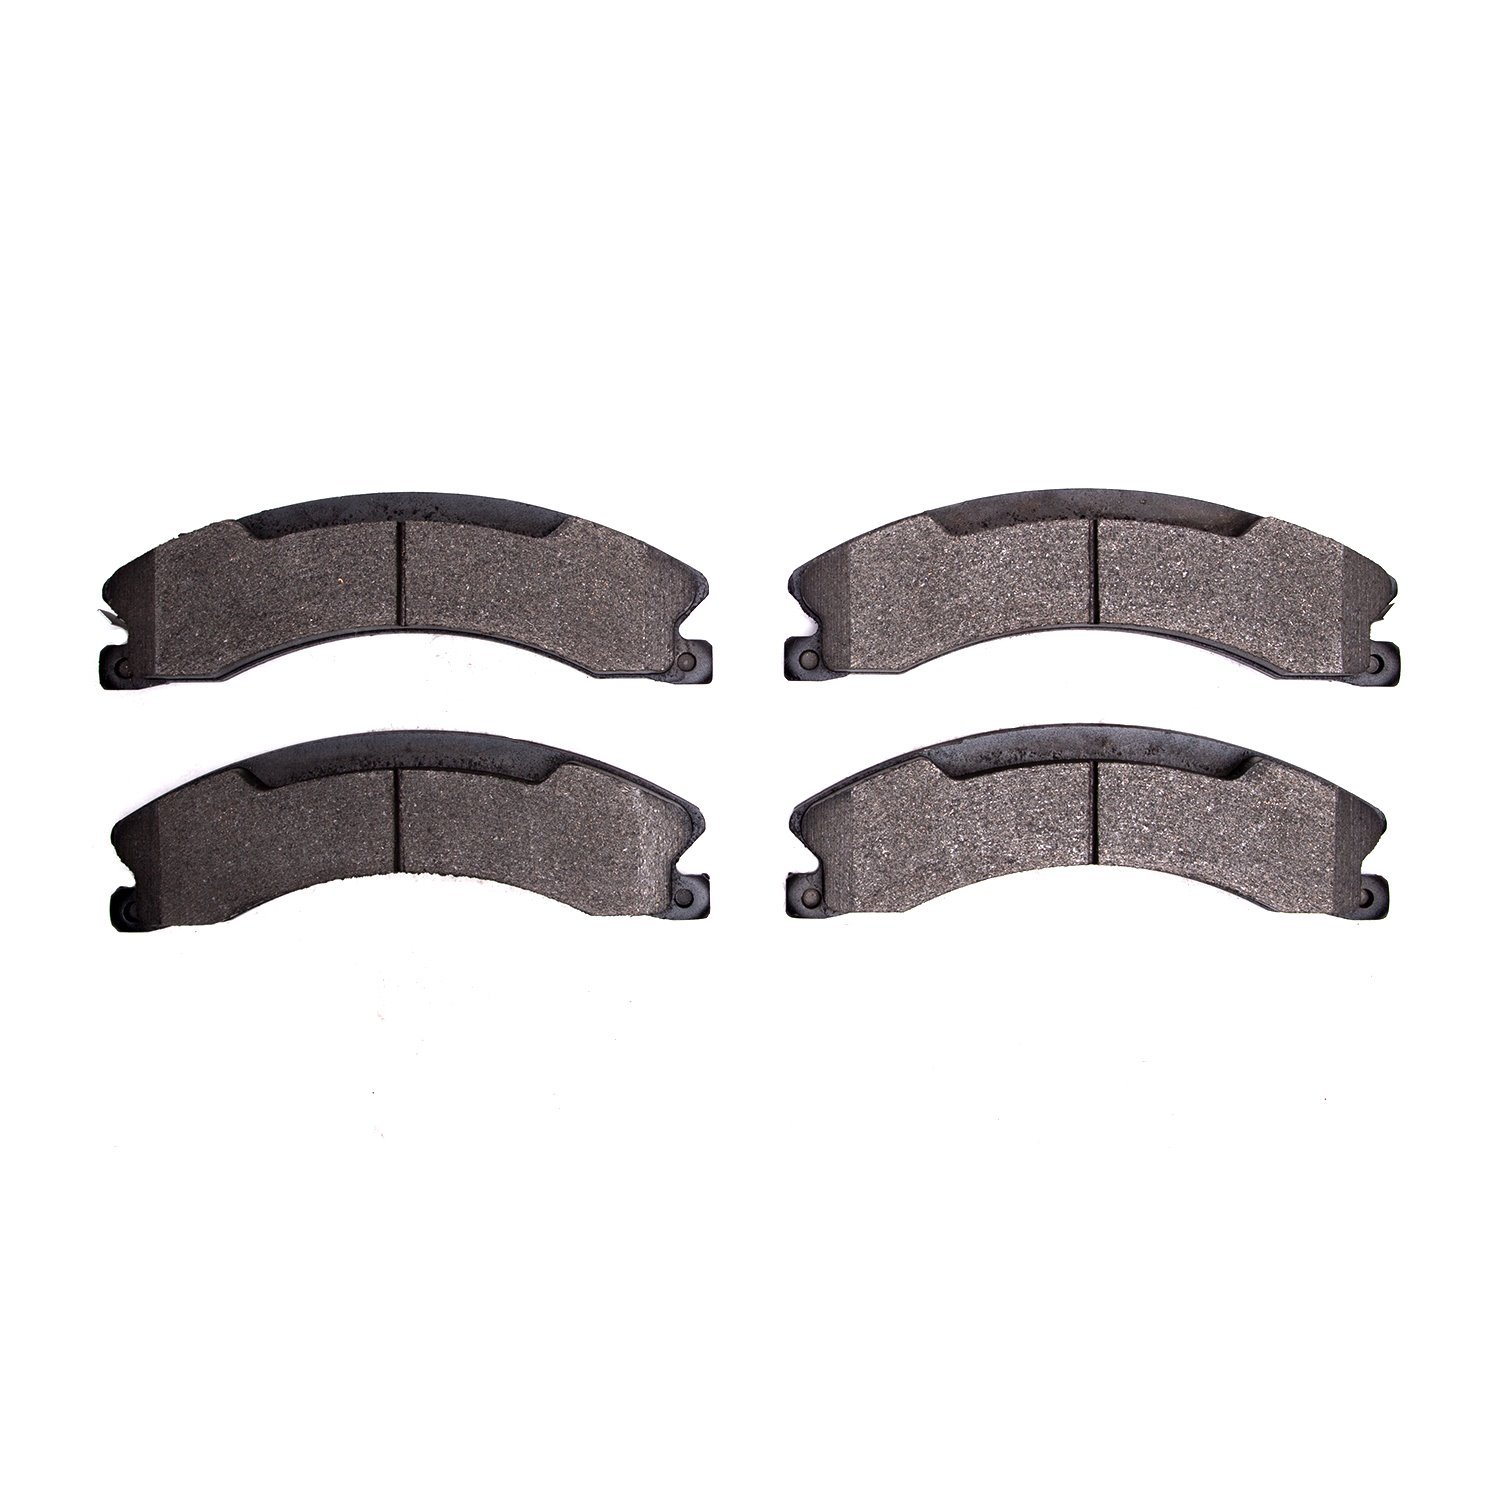 Semi-Metallic Brake Pads, Fits Select Fits Multiple Makes/Models, Position: Front & Rear